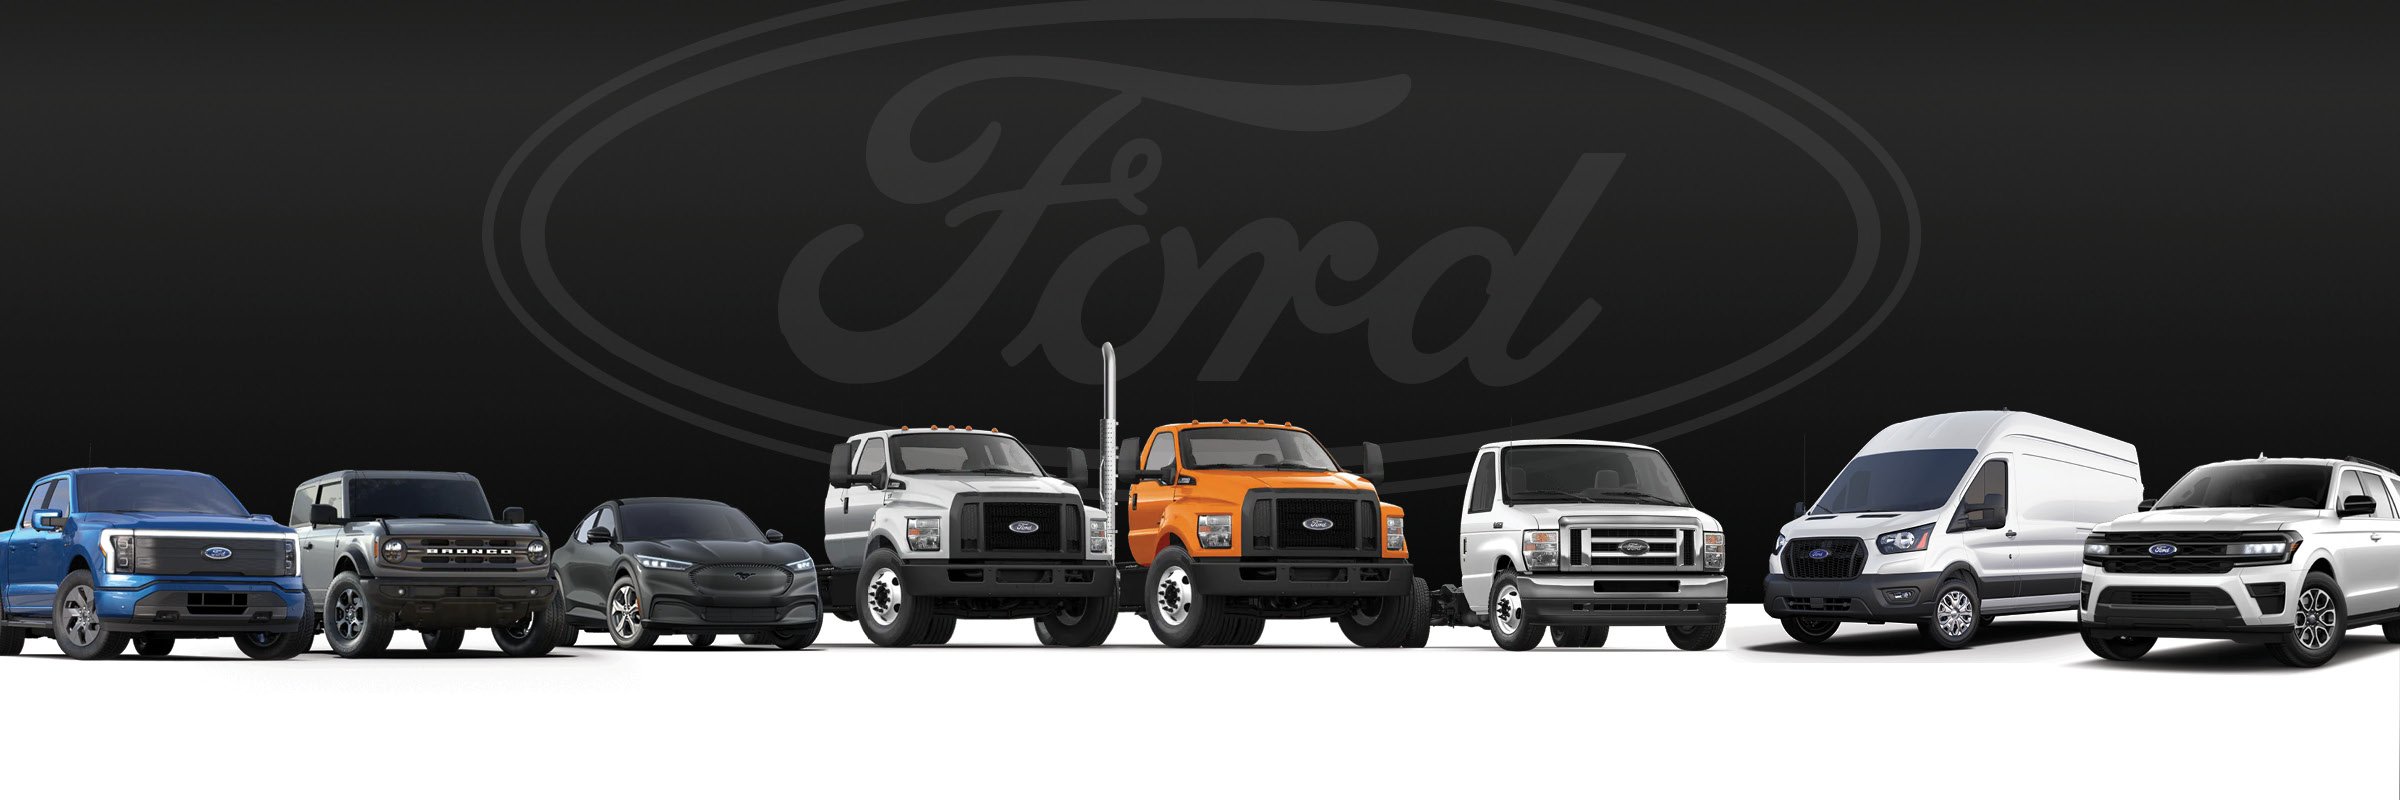 Ford Trucks | Ford Commercial Vehicles, Vans, SUVs | Ford Truck Sales at Rush Truck Centers